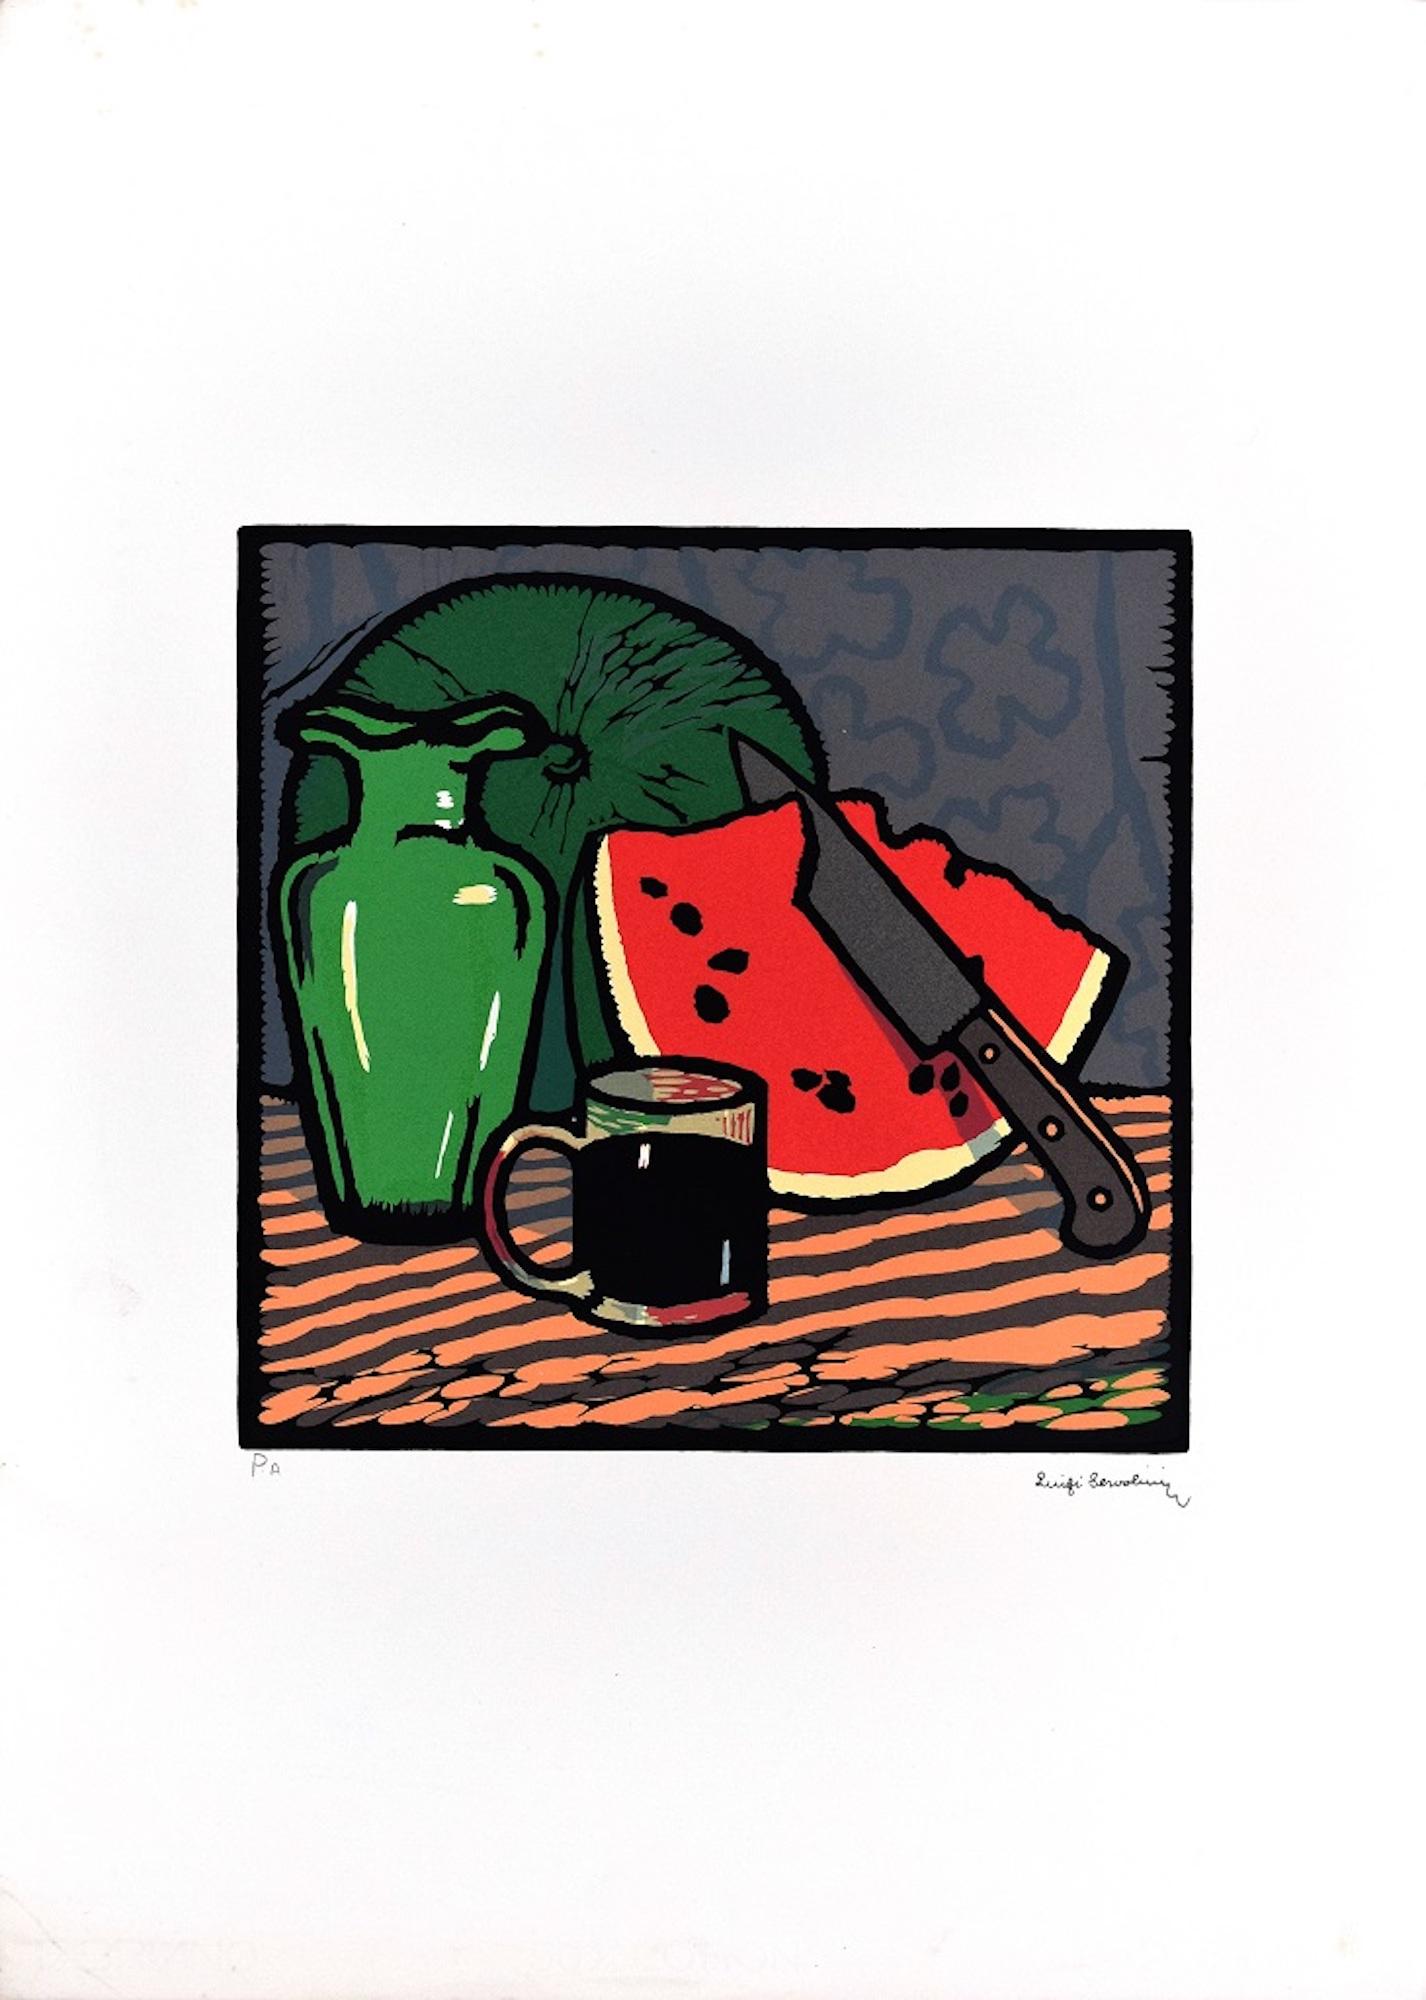 Still Life with Watermelon - Woodcut Print by L. Servolini - 1977 - Black Still-Life Print by Luigi Servolini